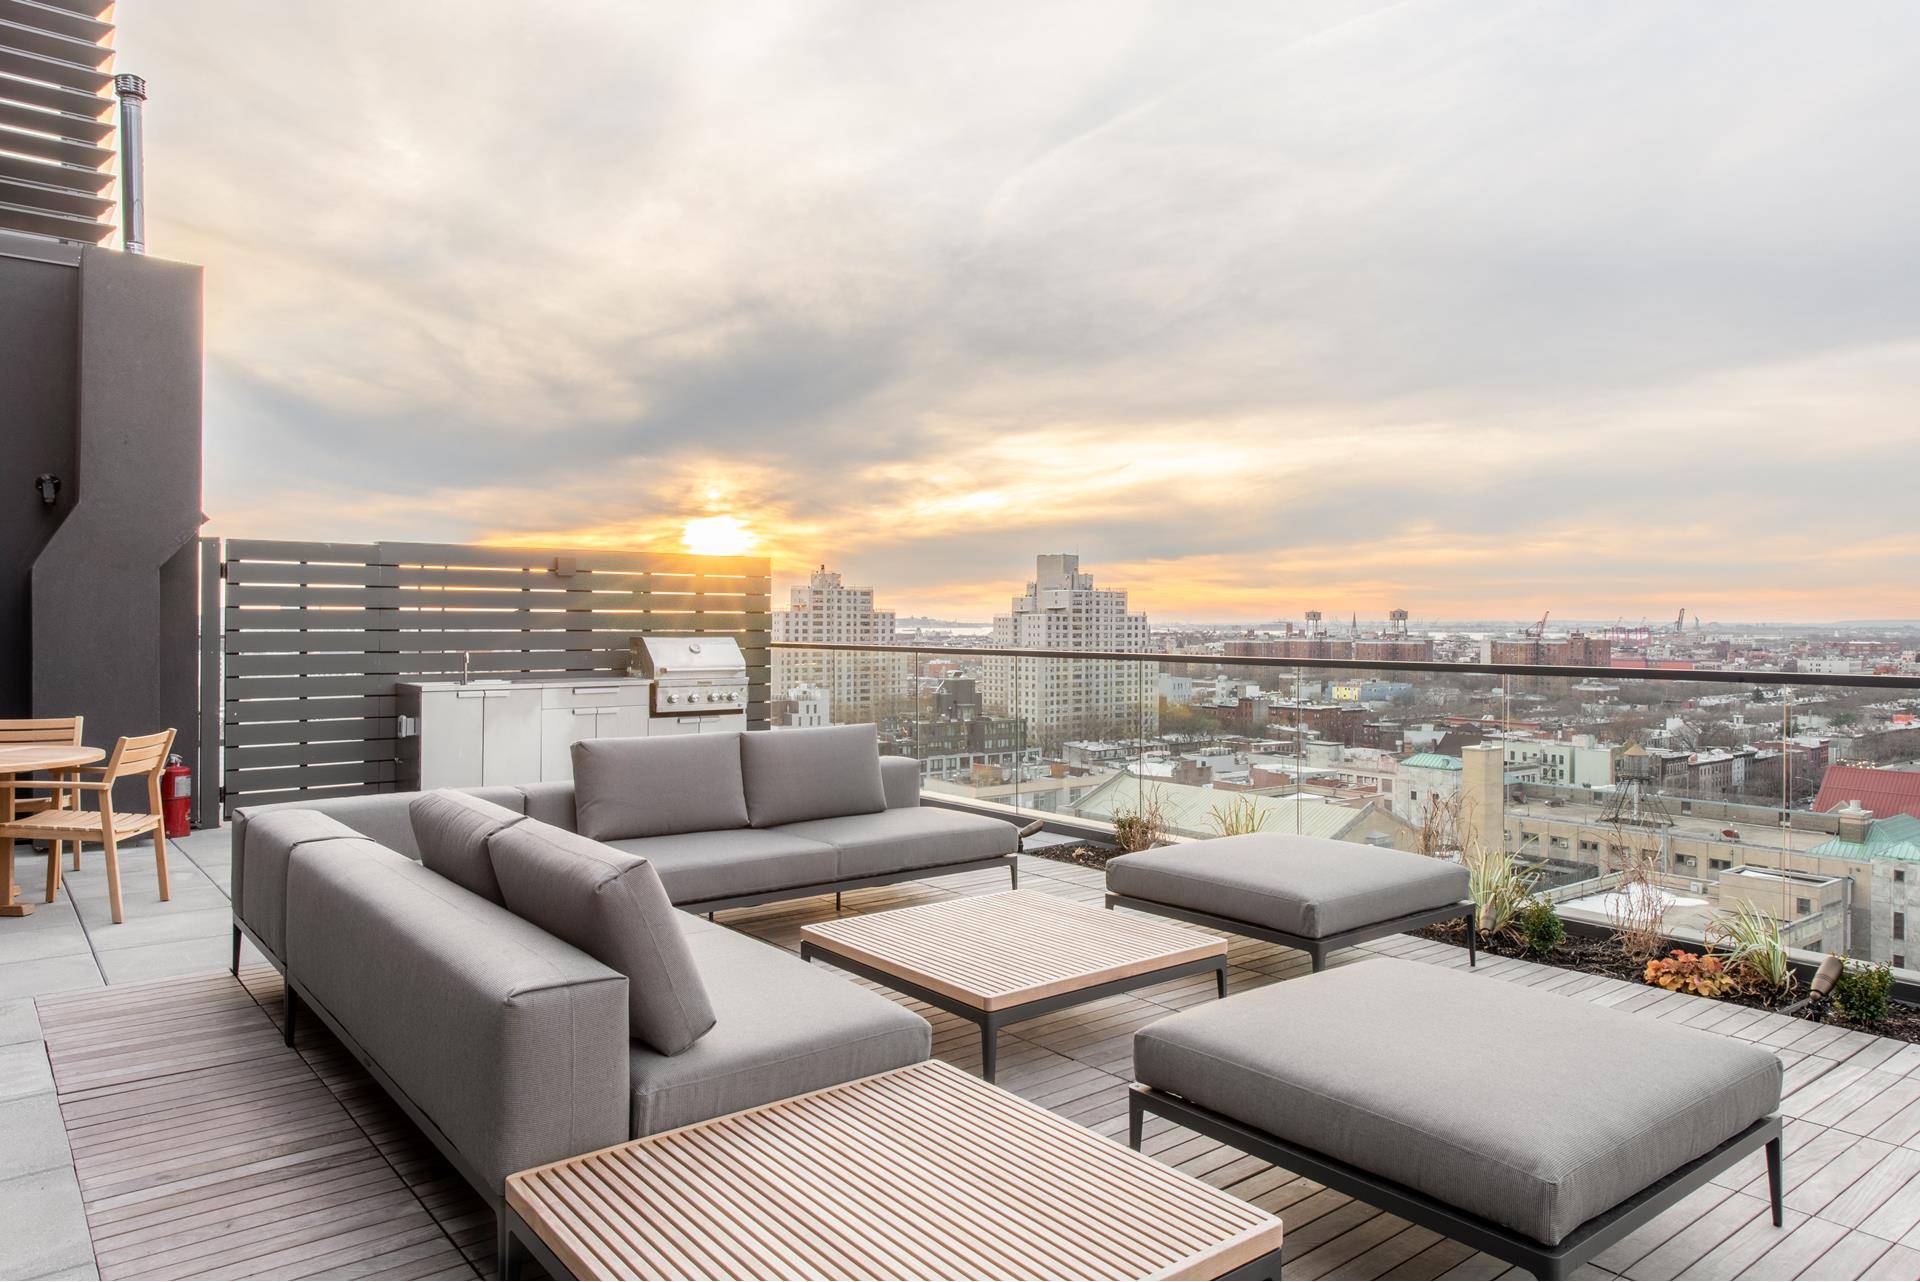 Immediate Occupancy ! Residence 1101 is an impeccably designed and spacious 1, 249 square foot, 2 bedroom, 2 bath home with an enormous 110 square foot balcony and incredible, sweeping ...